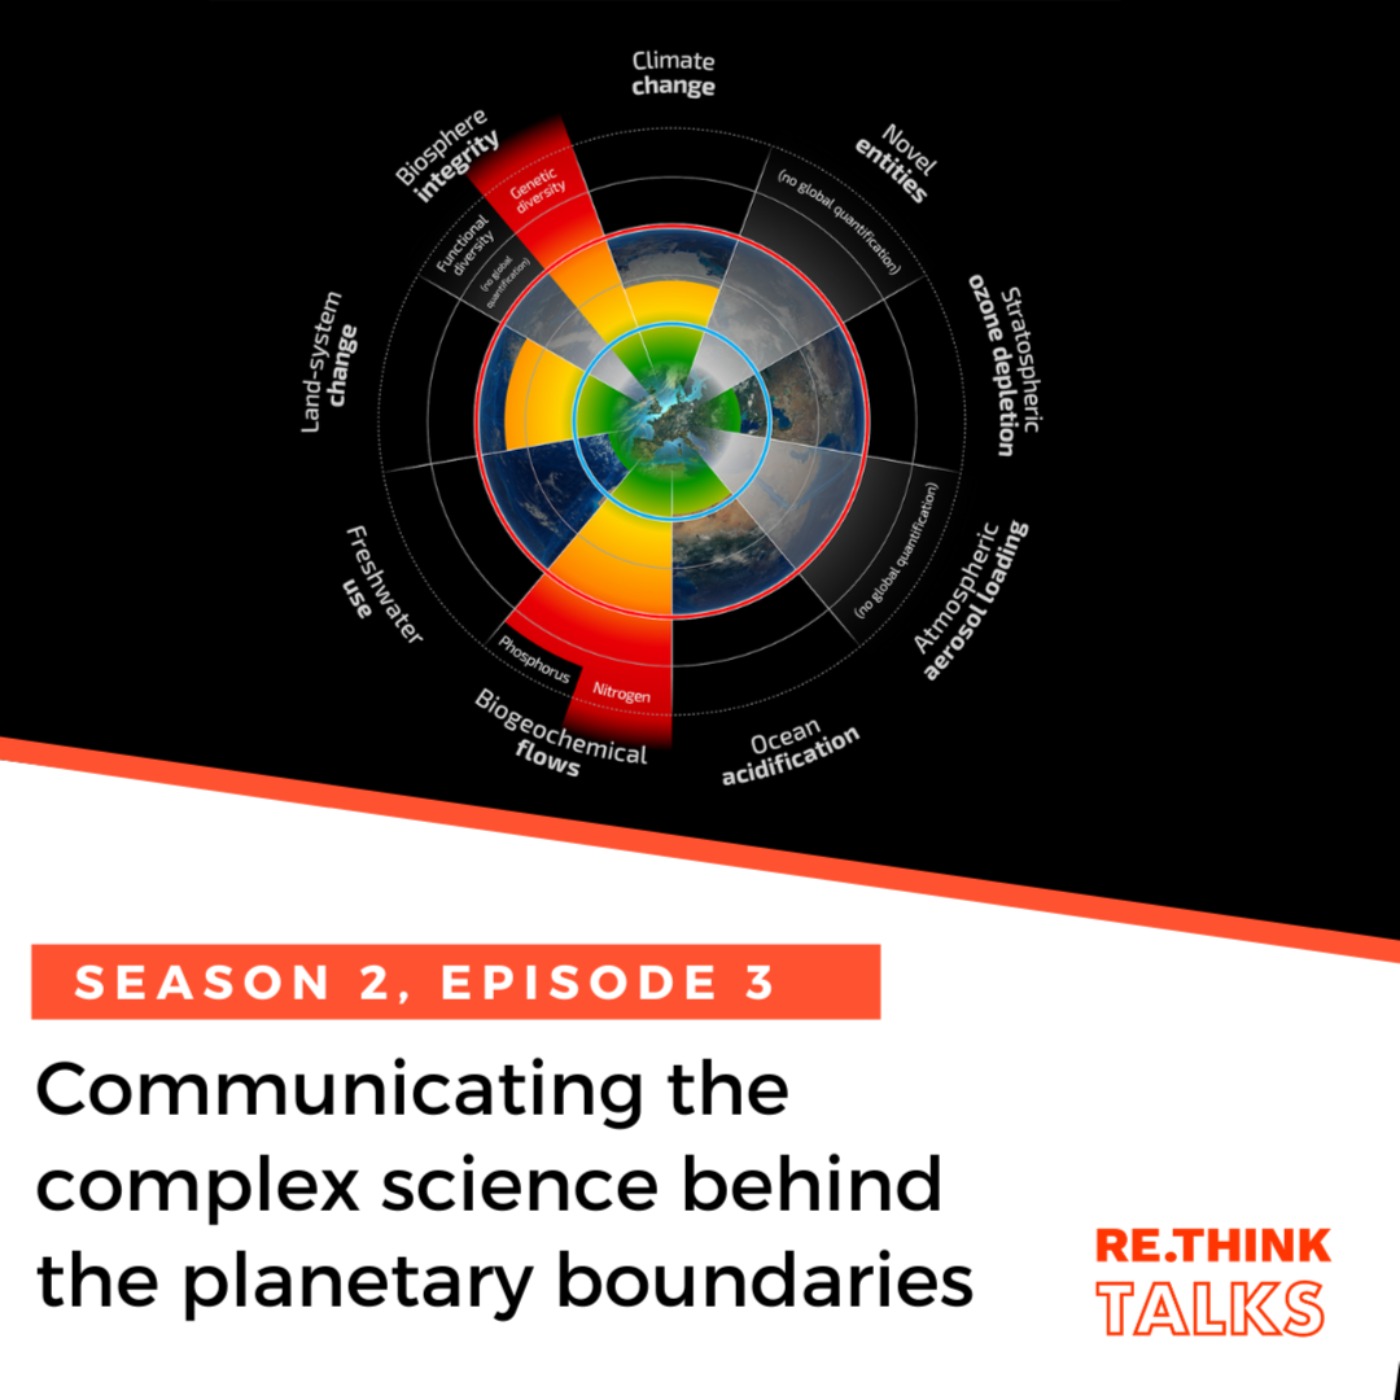 Communicating the complex science behind the planetary boundaries